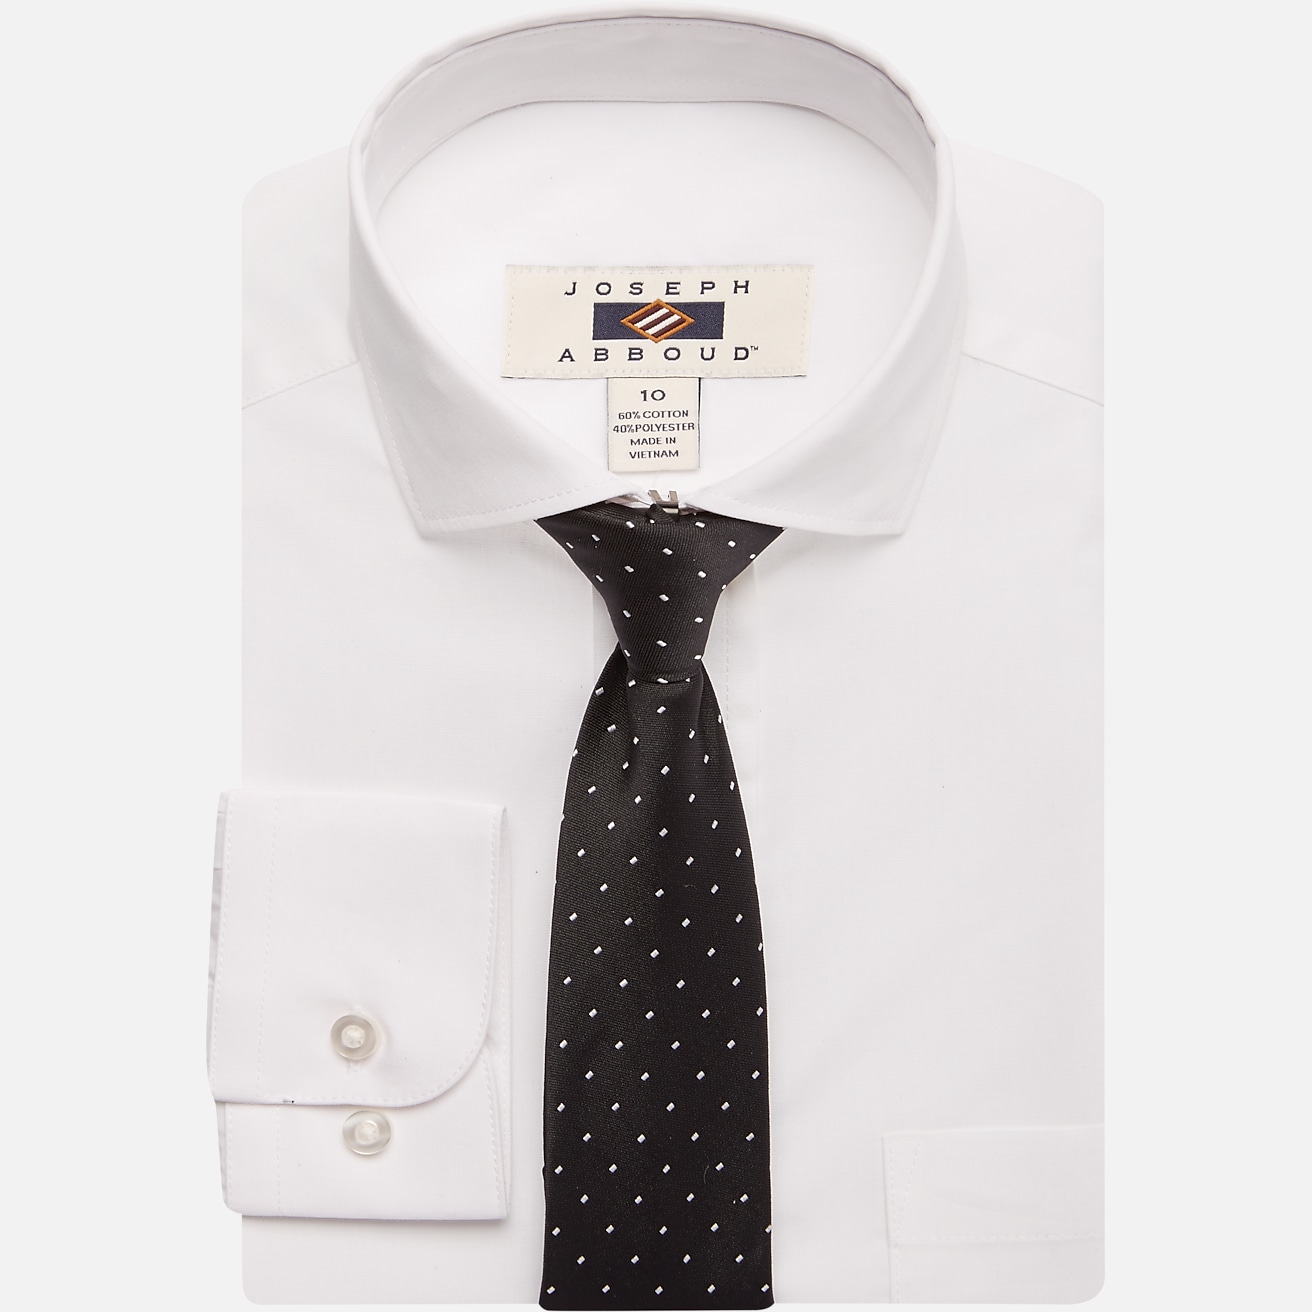 Shirt and Tie Sets, Shirt Tie Combo